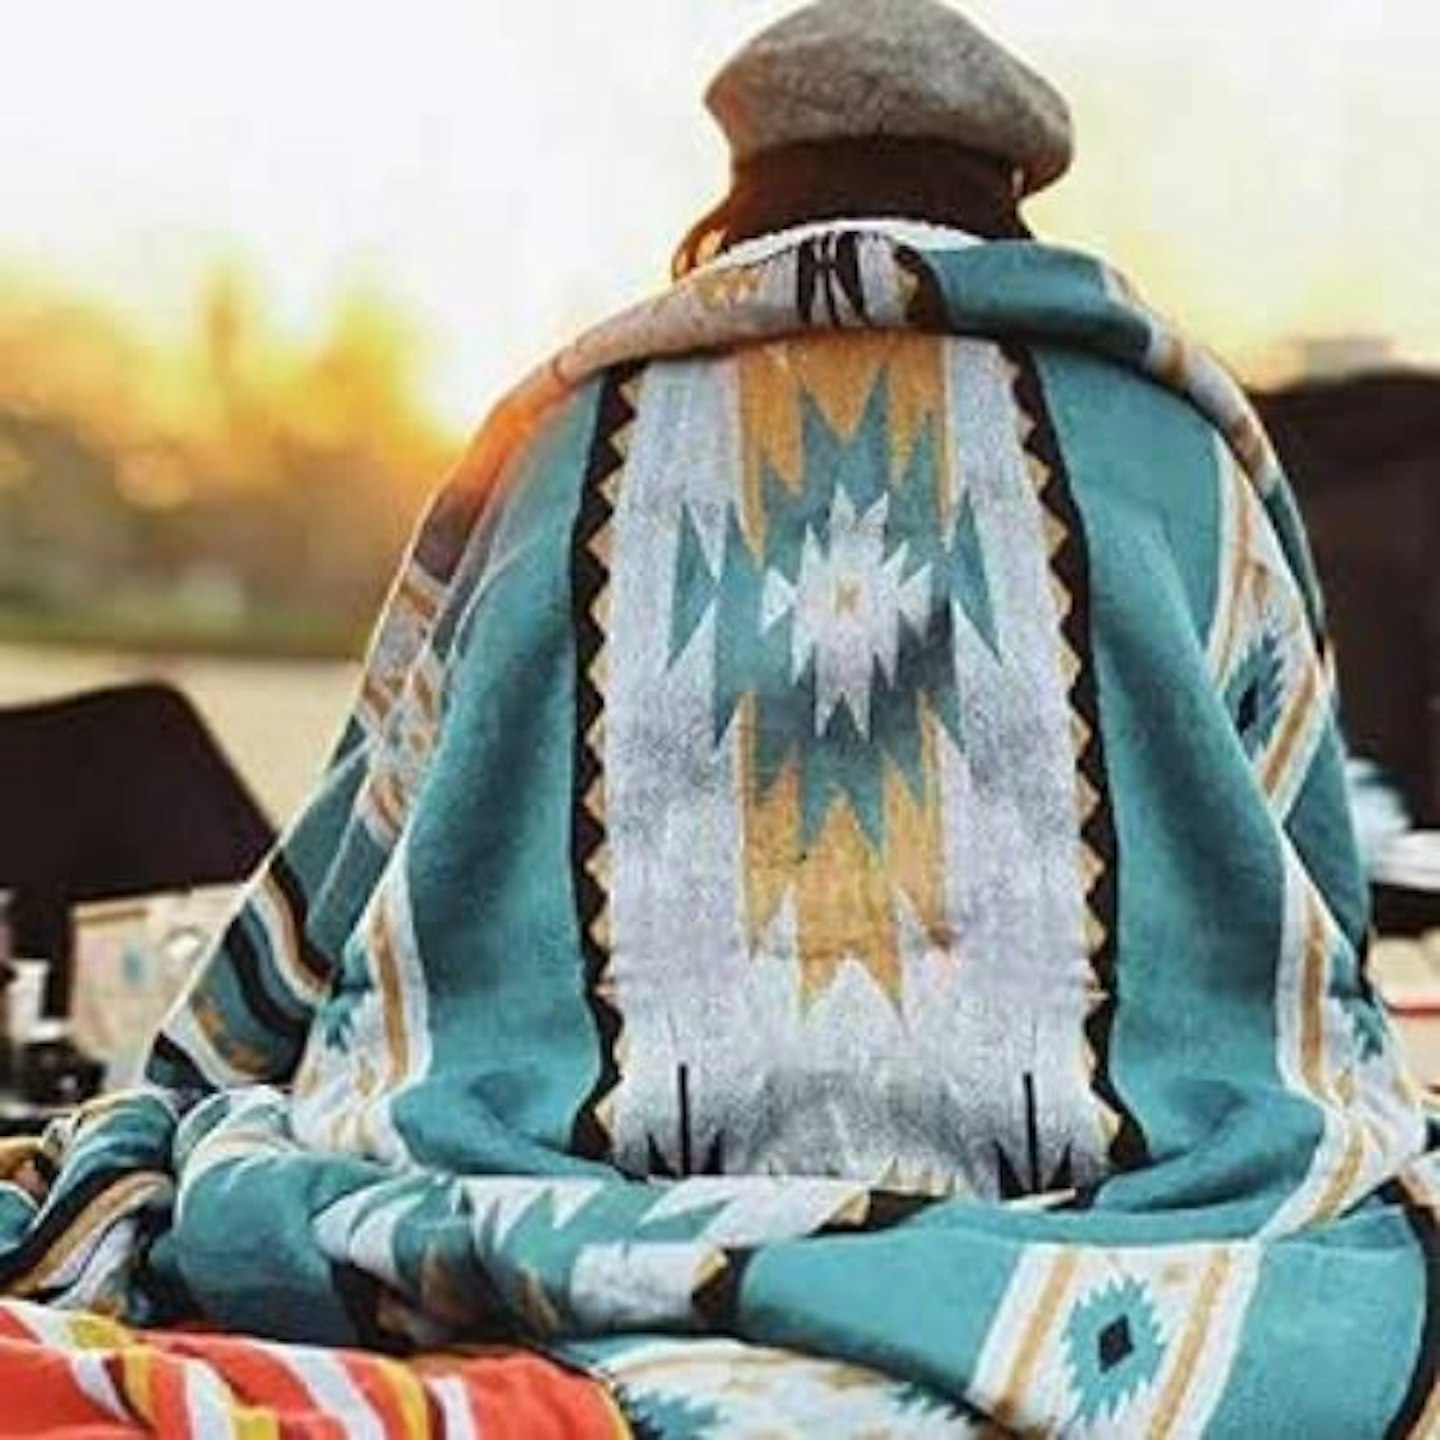 Aztec Patterned Throw Blanket